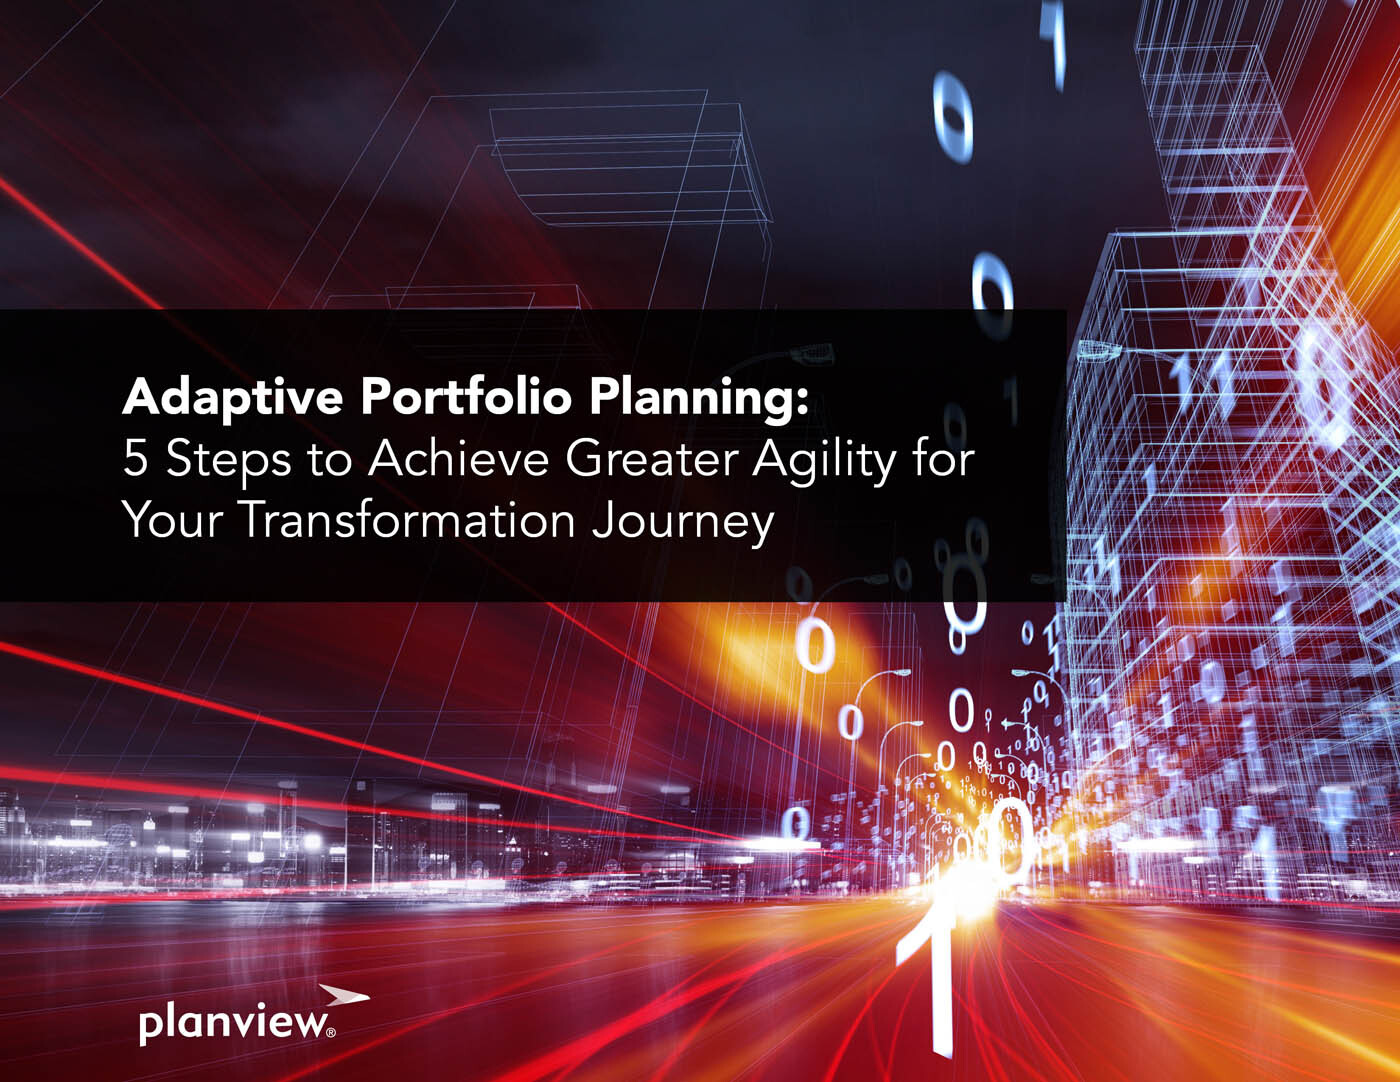 Adaptive Portfolio Planning: 5 Steps to Achieve Greater Agility for Your Transformation Journey 